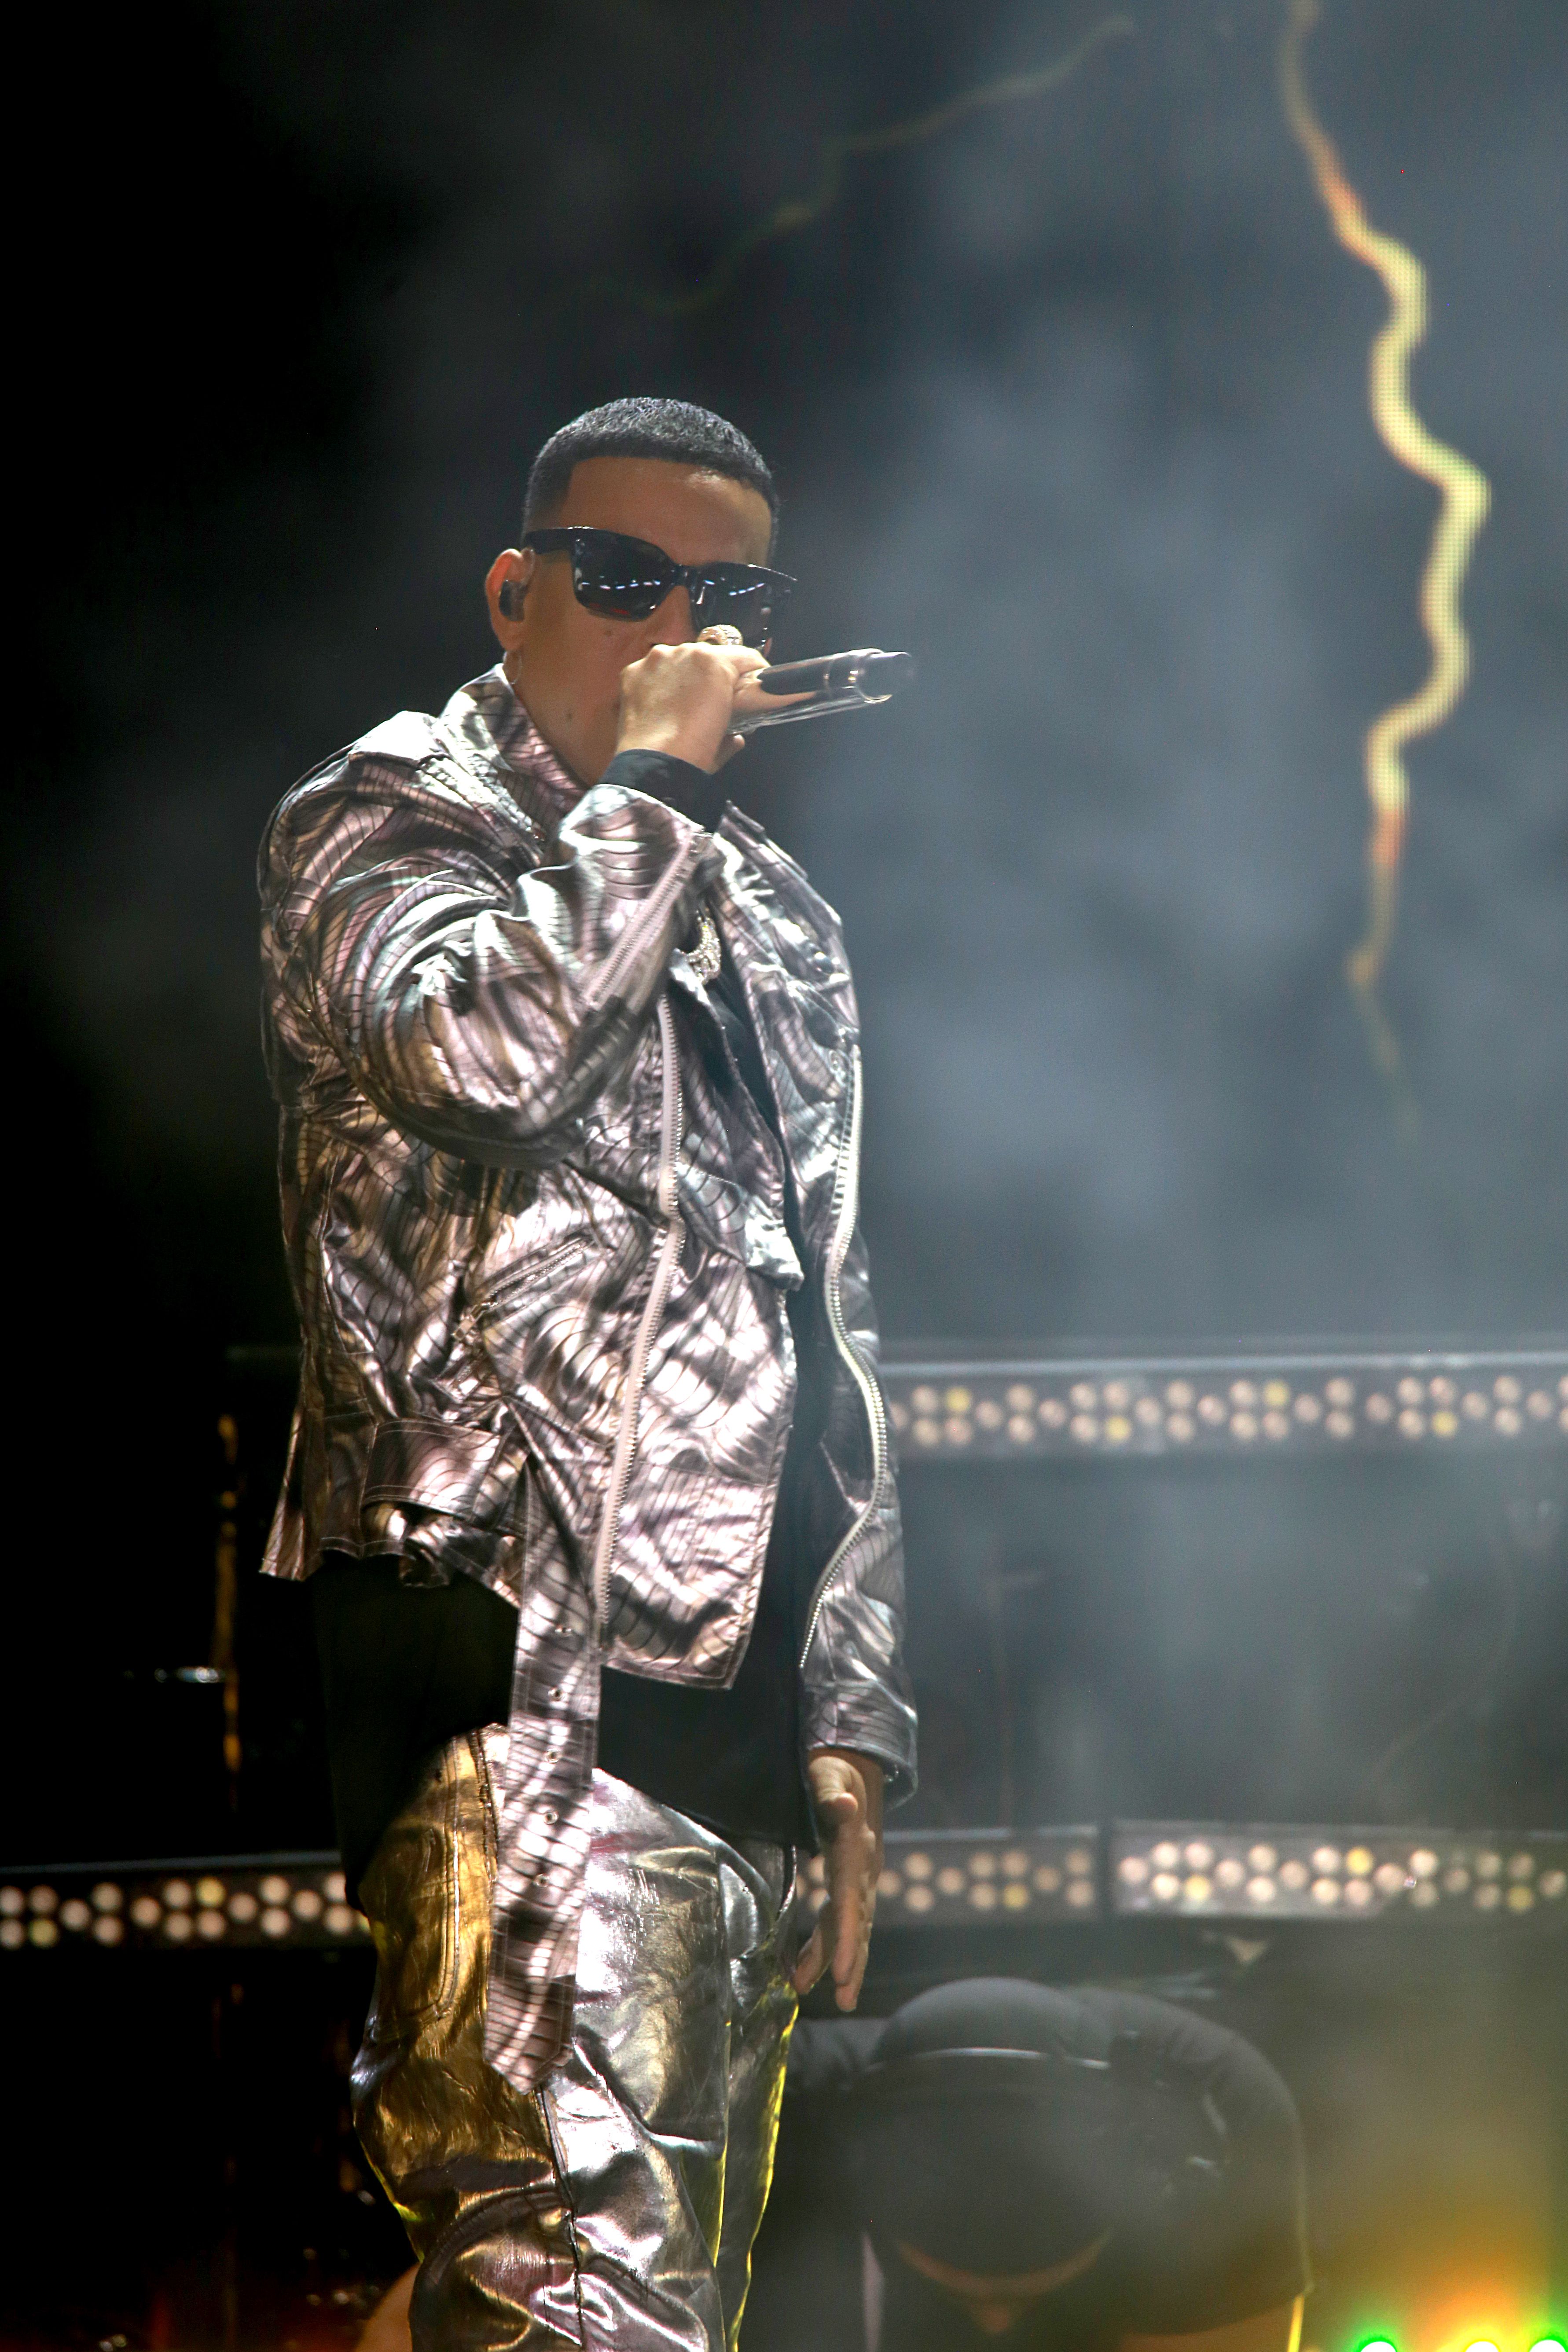 Daddy Yankee Announces Retirement With Farewell Tour and New Album  Legendaddy